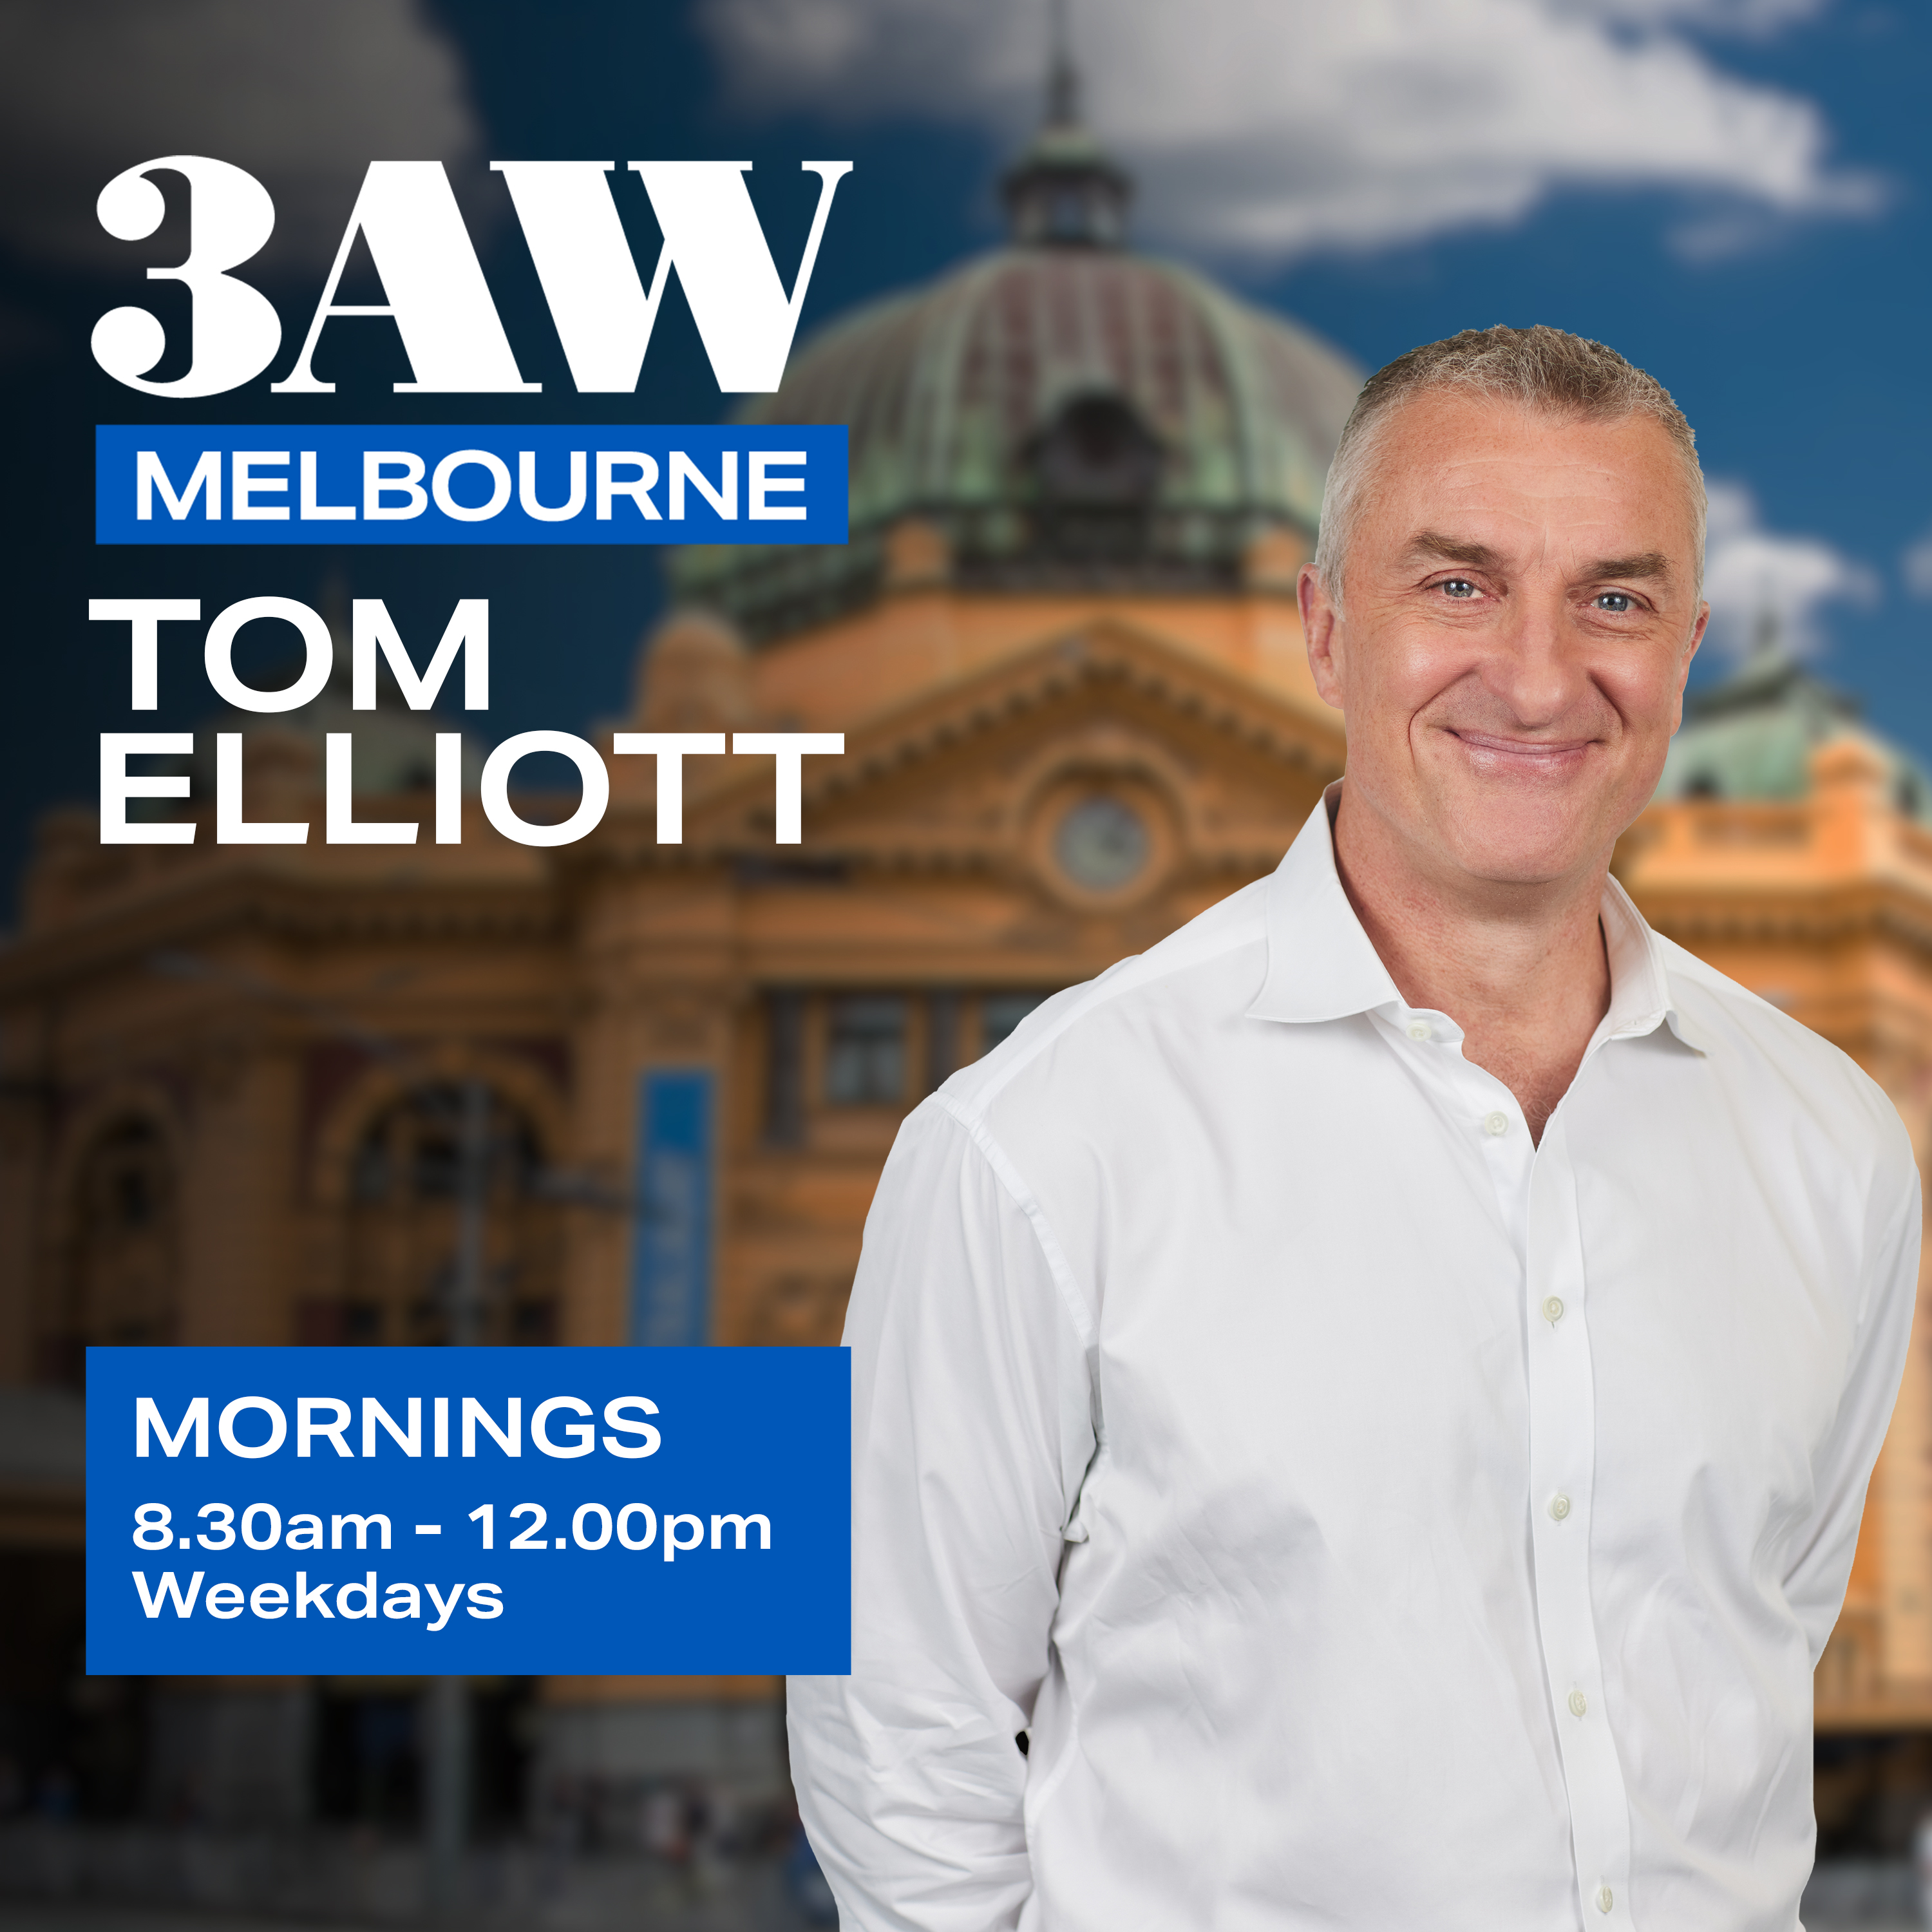 'Could we just have a normal day?': Why Tom Elliott thinks society is 'quite possibly unravelling'